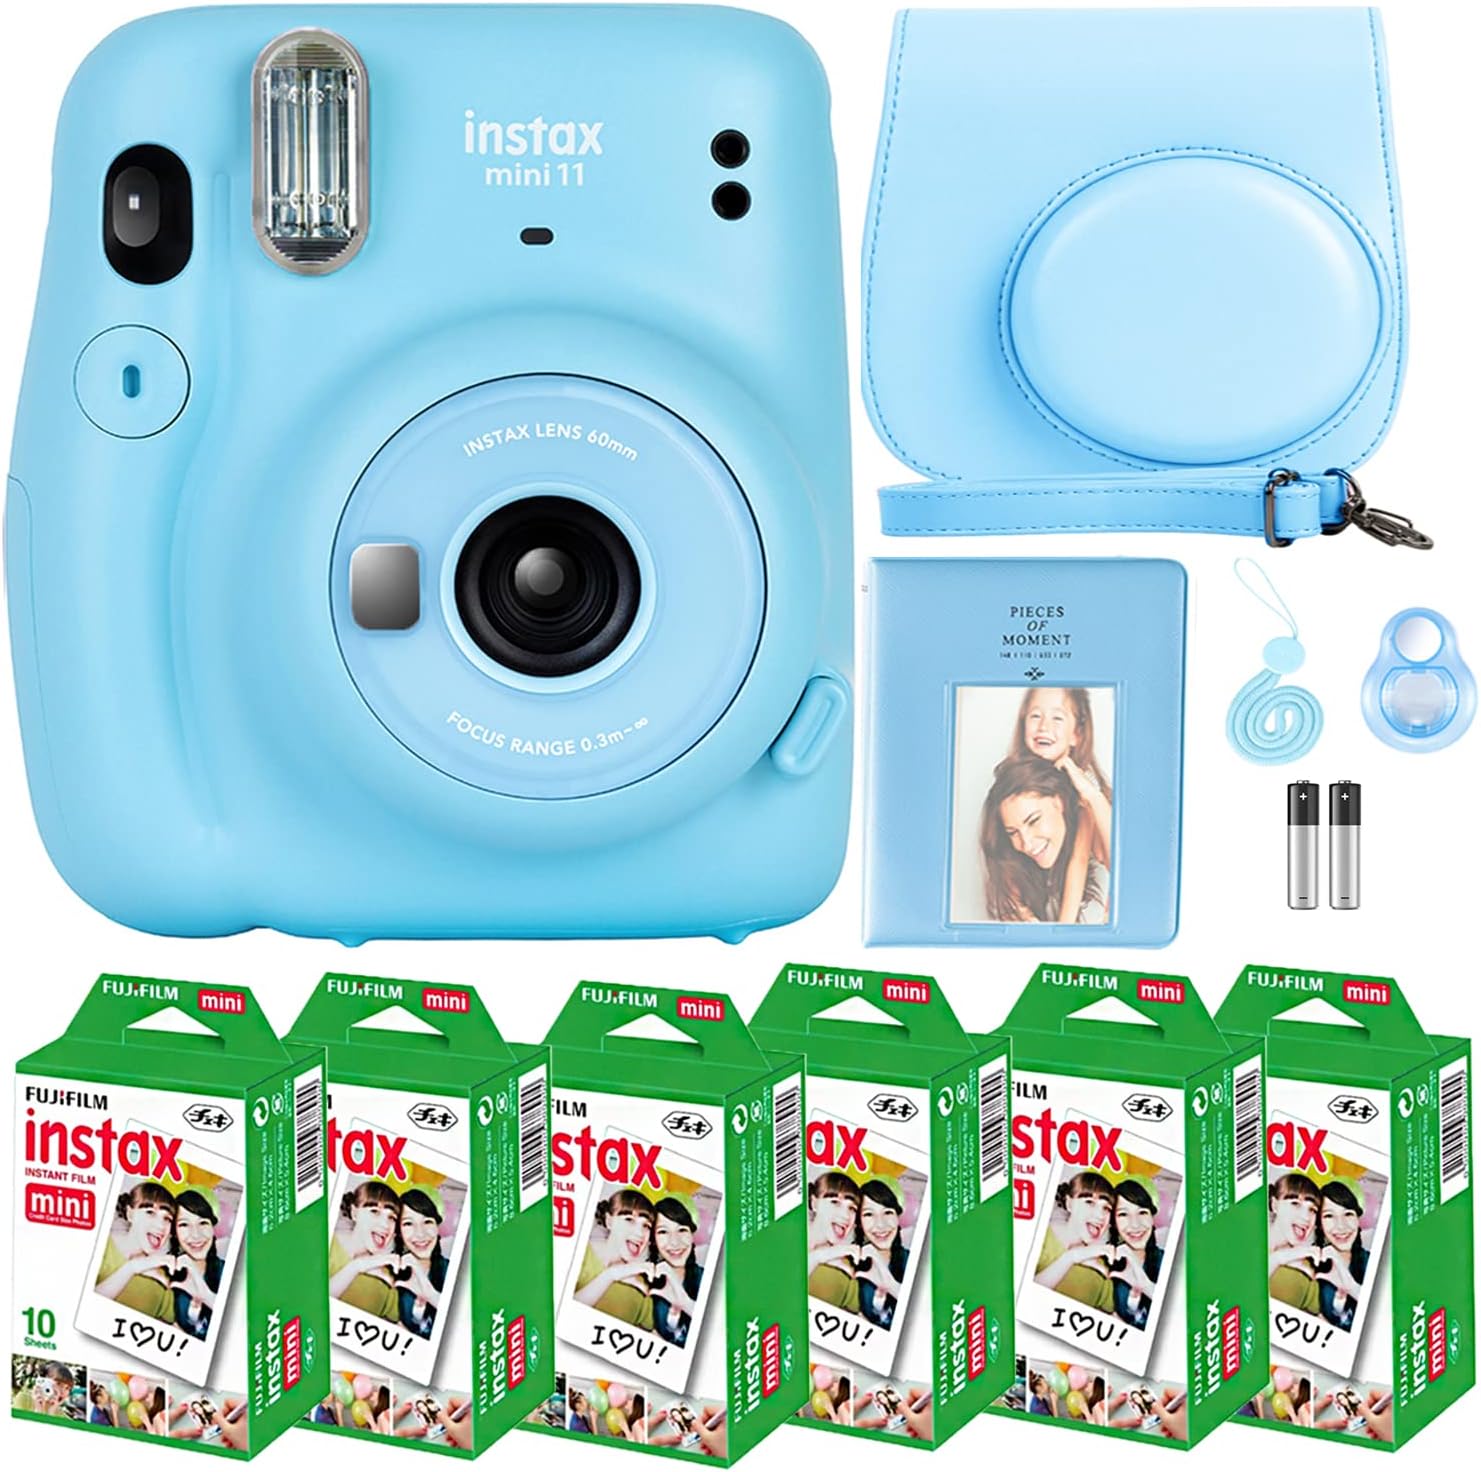 instant camera best christmas gifts for stepdaughter from stepdad - ultimate buyer's guide 2023